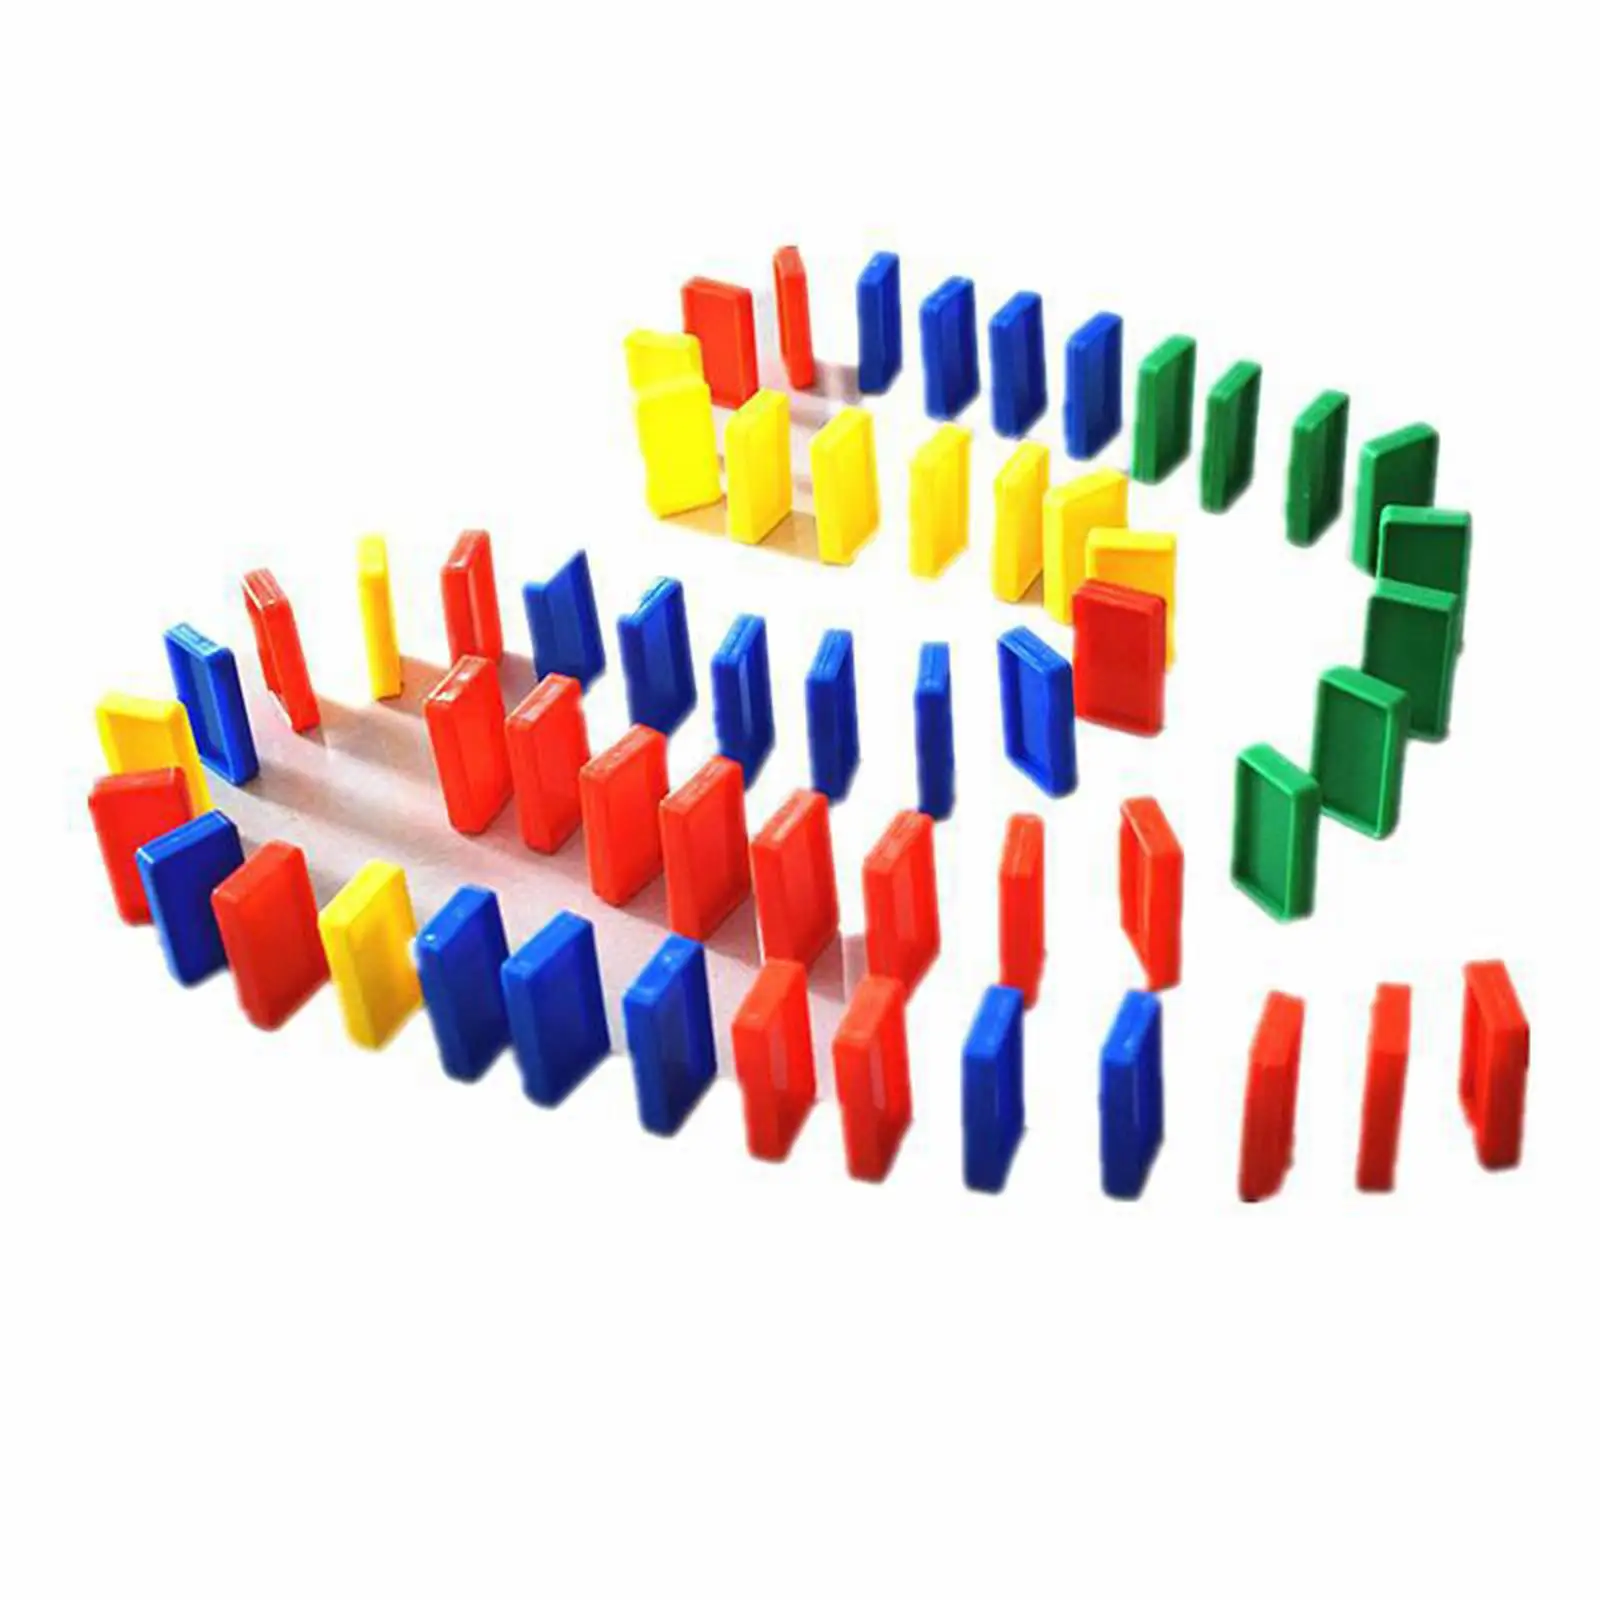 100 Pieces Colorful Dominoes Blocks Educational Play Toy Family Games Game Stacking Toy for Toddler Kids Birthday Gifts